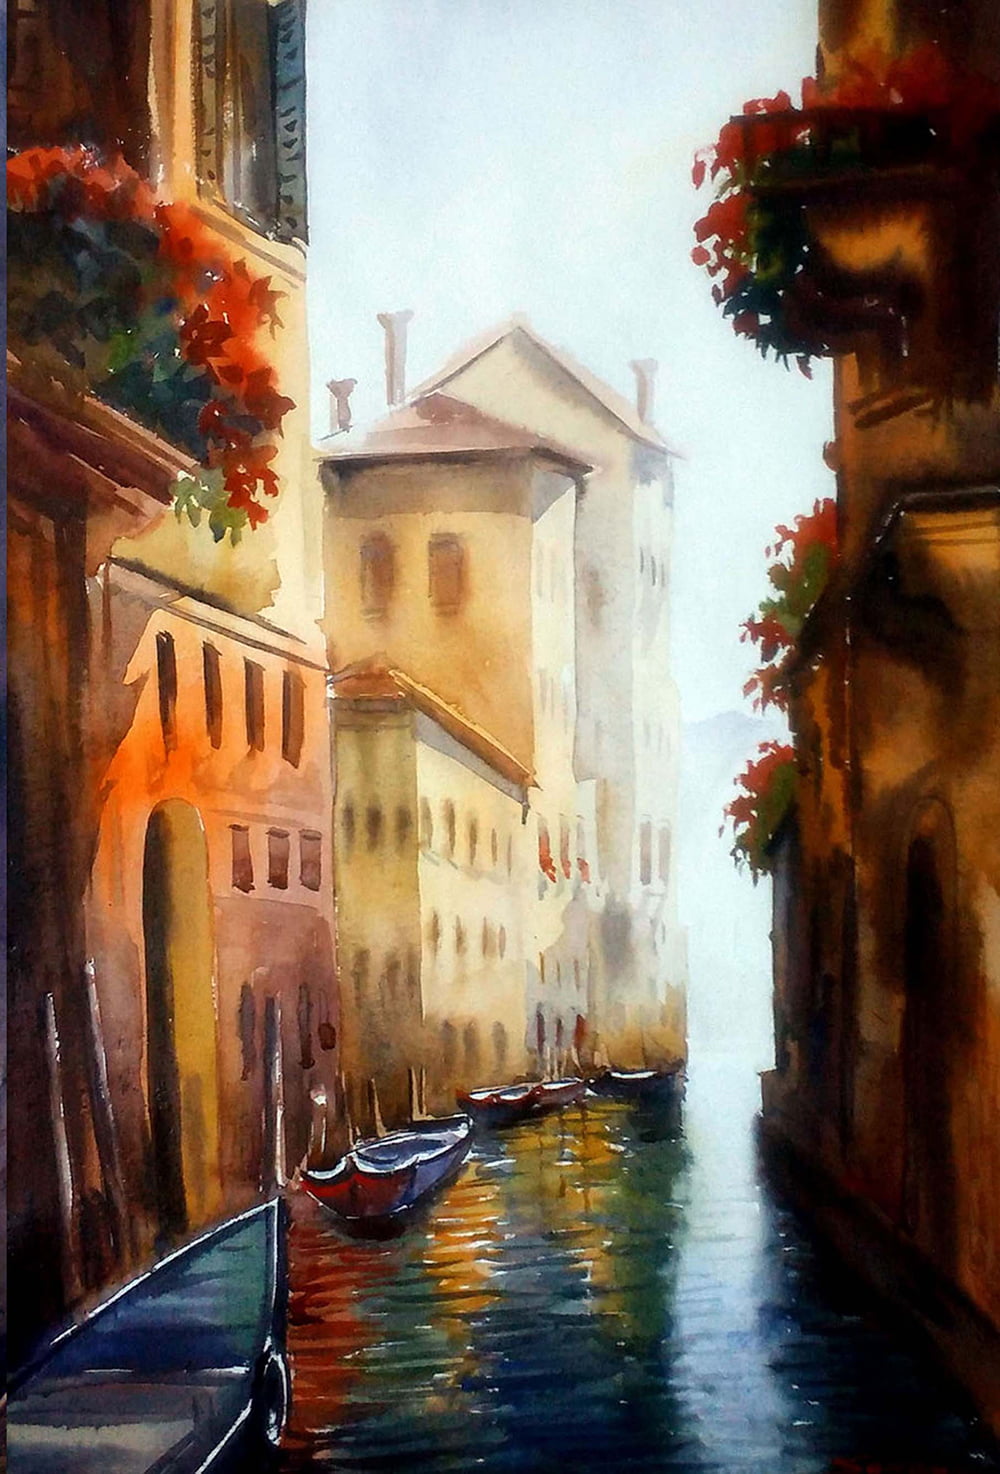 Venice – Canal in The Morning and Flowers, Samiran Sarkar (India) - Exquisite Art